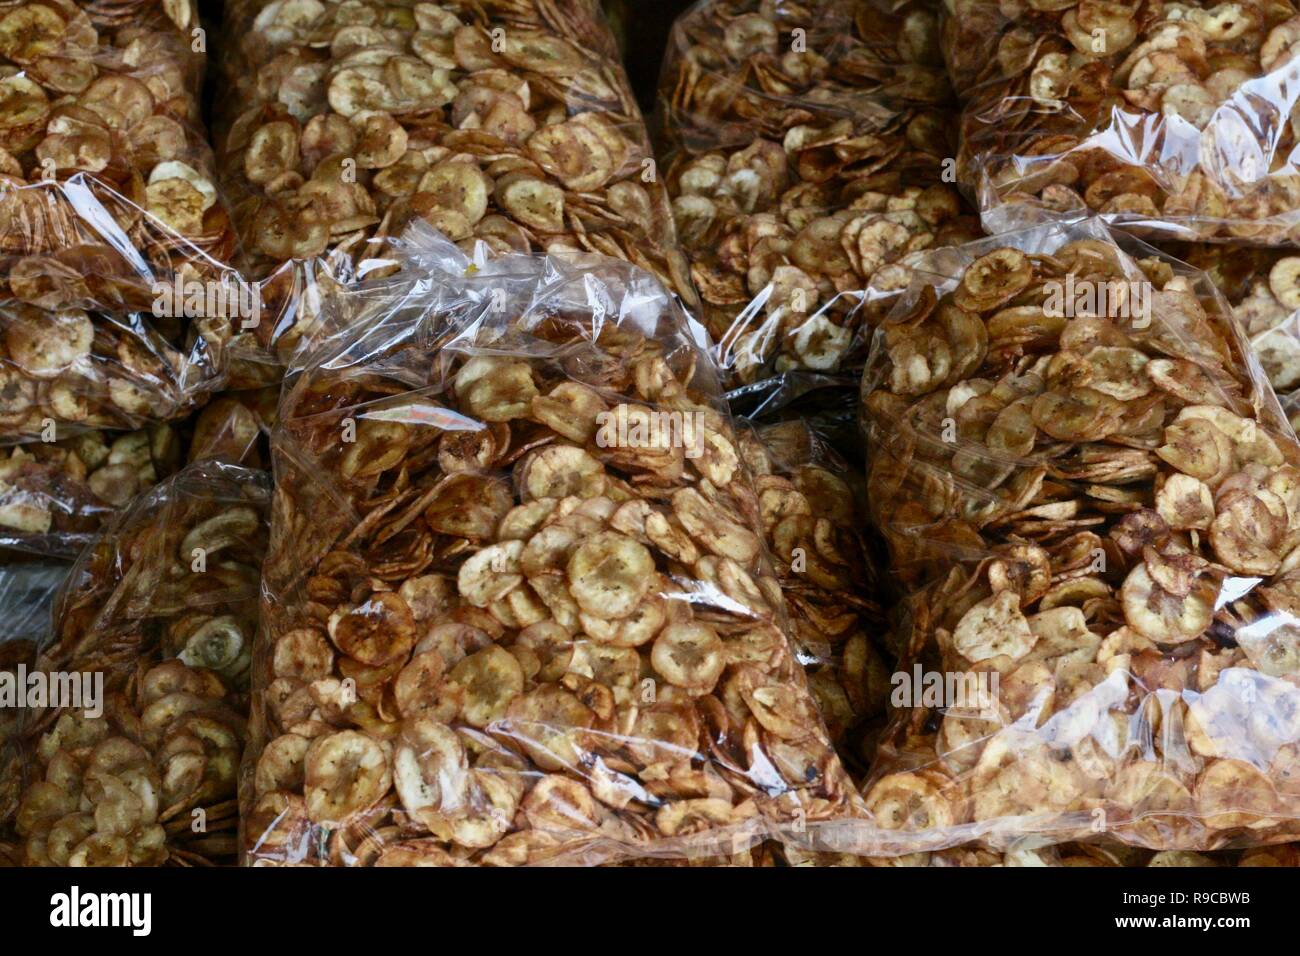 Bags of banana chips sold as street food snacks in Cambodia Stock Photo